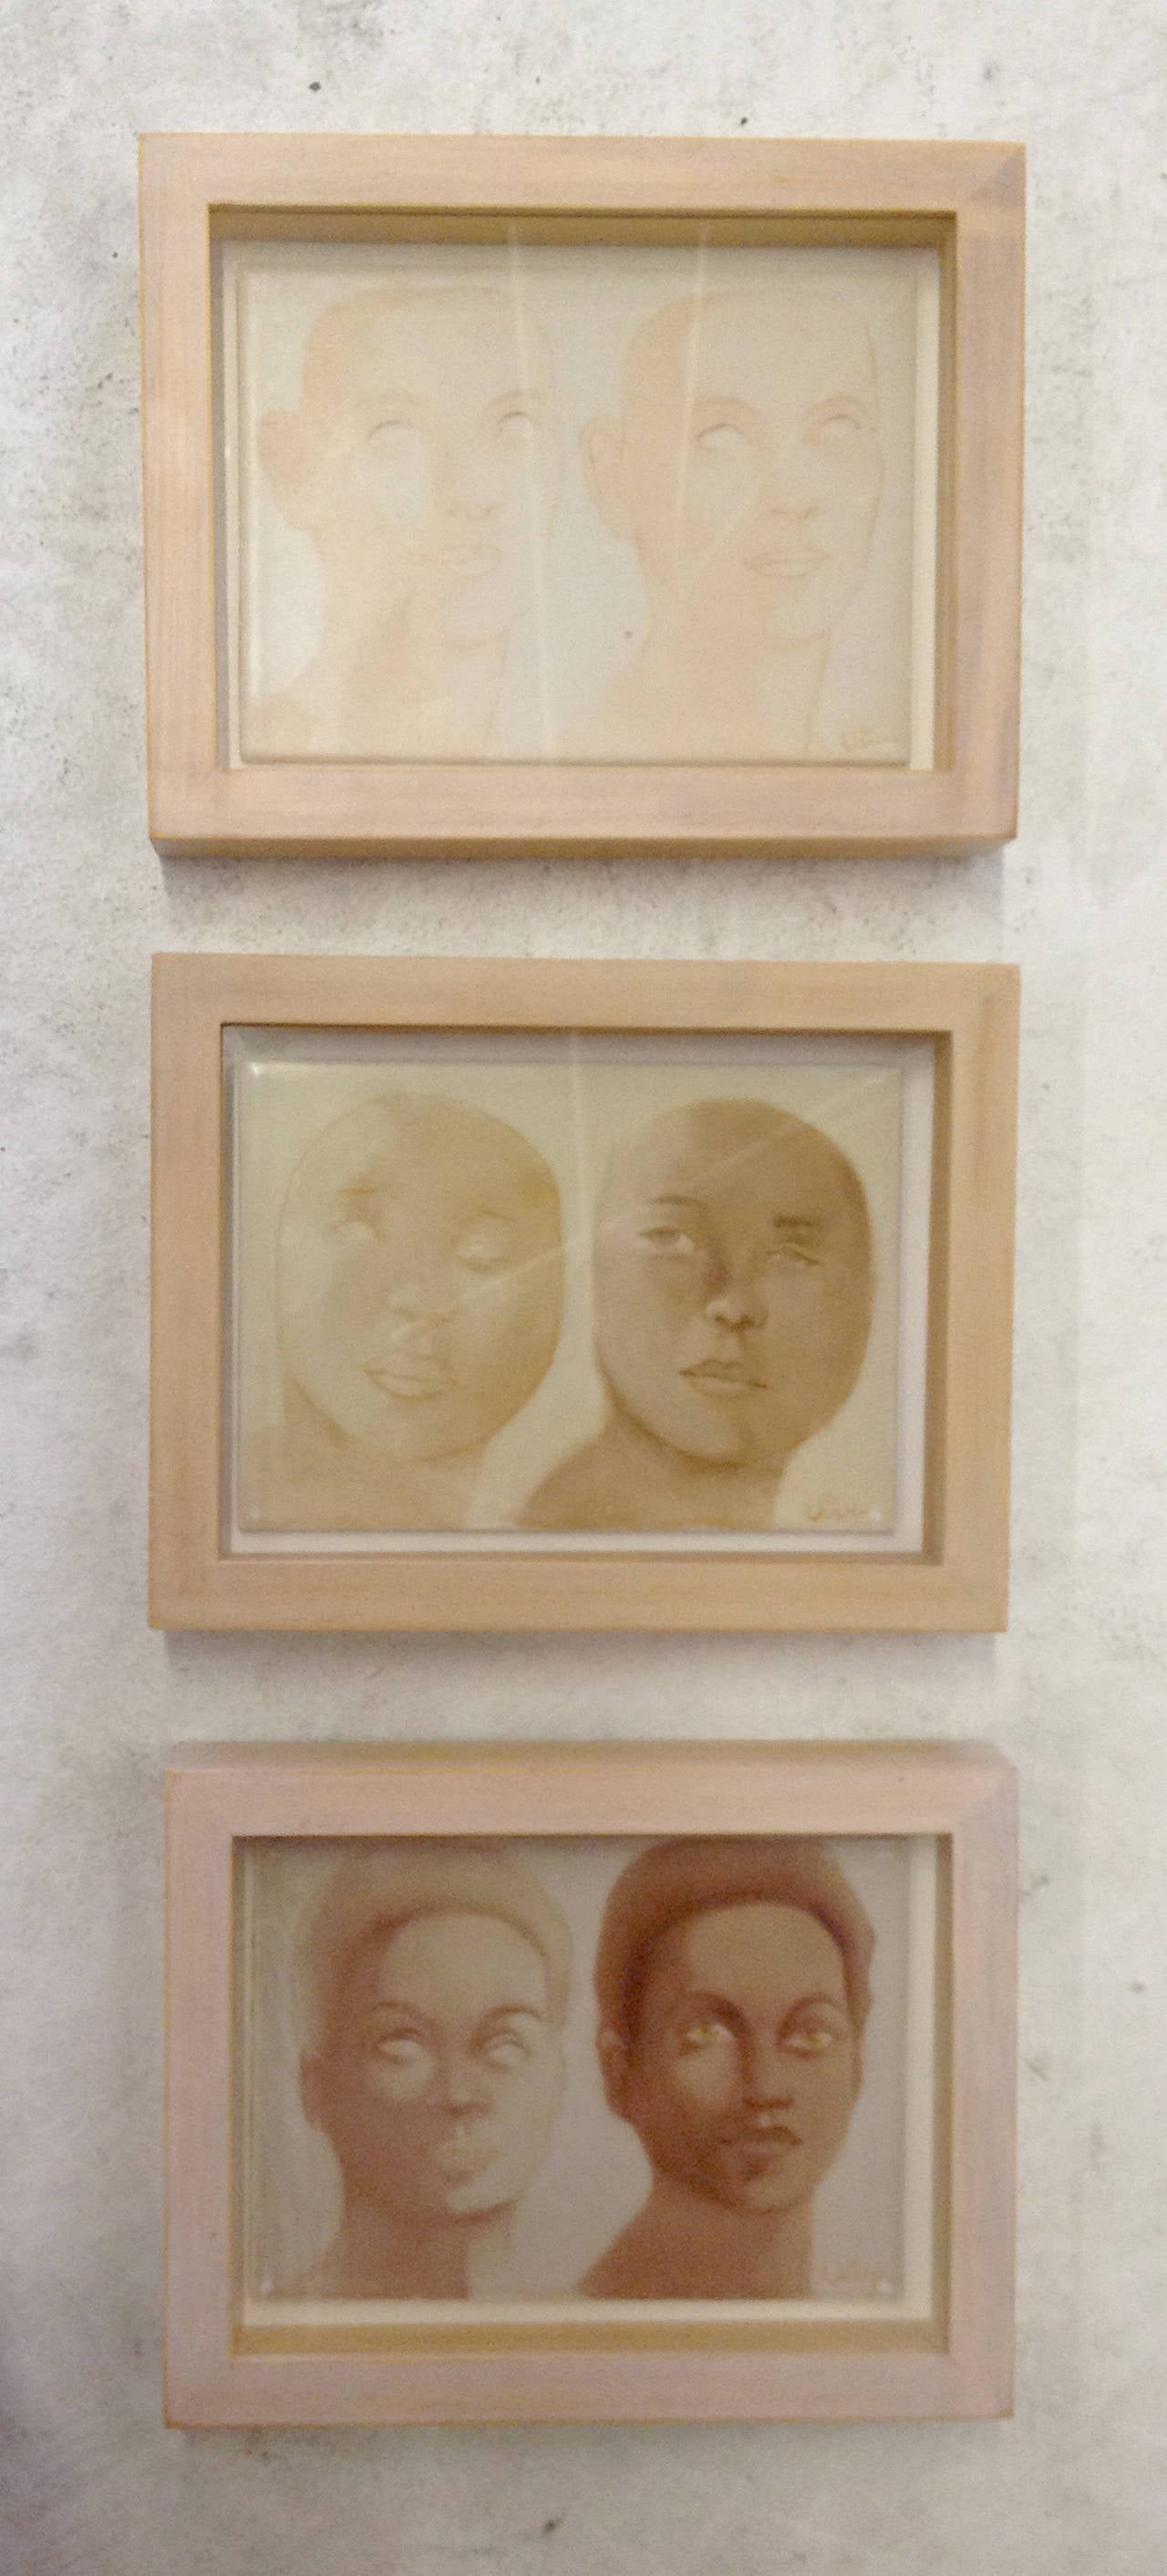 American Suite of Three Portraits on CeramicTiles signed Vivy